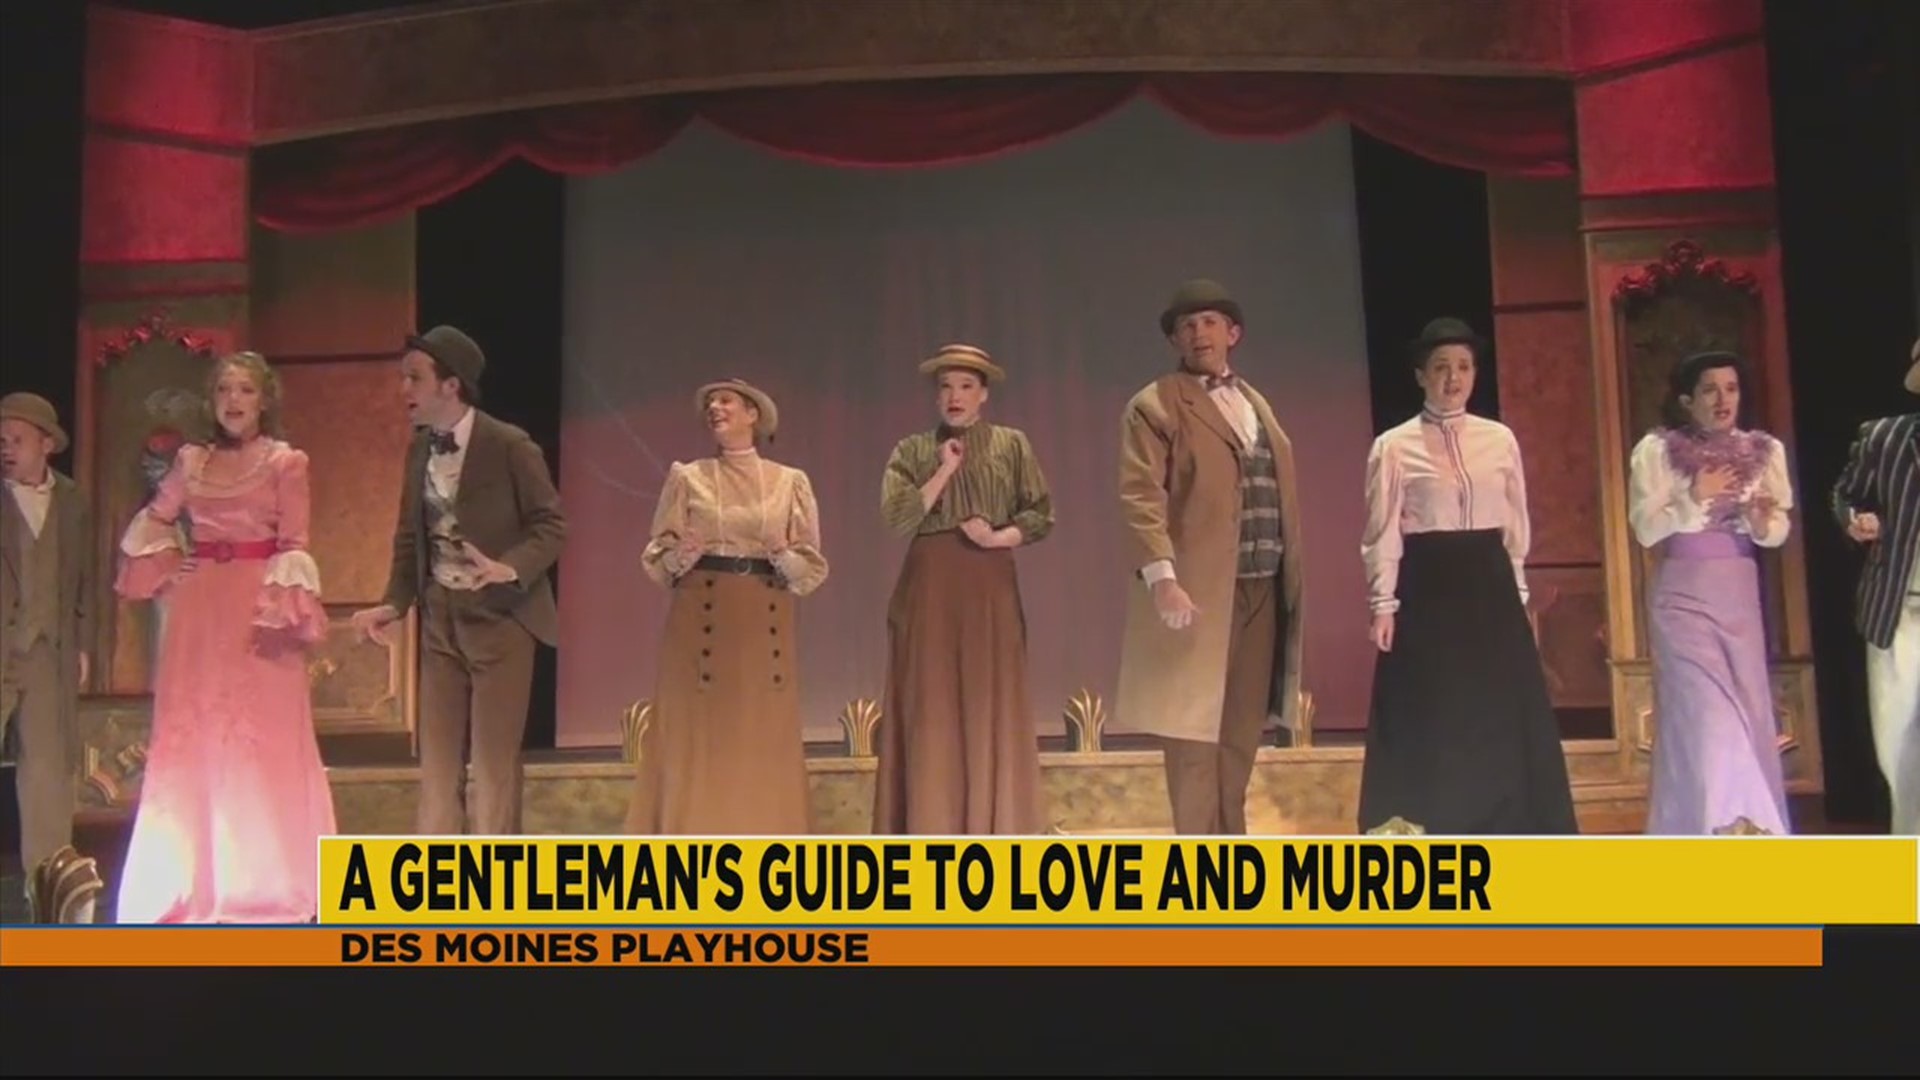 Des Moines Playhouse - A Gentleman's Guide to Love and Murder